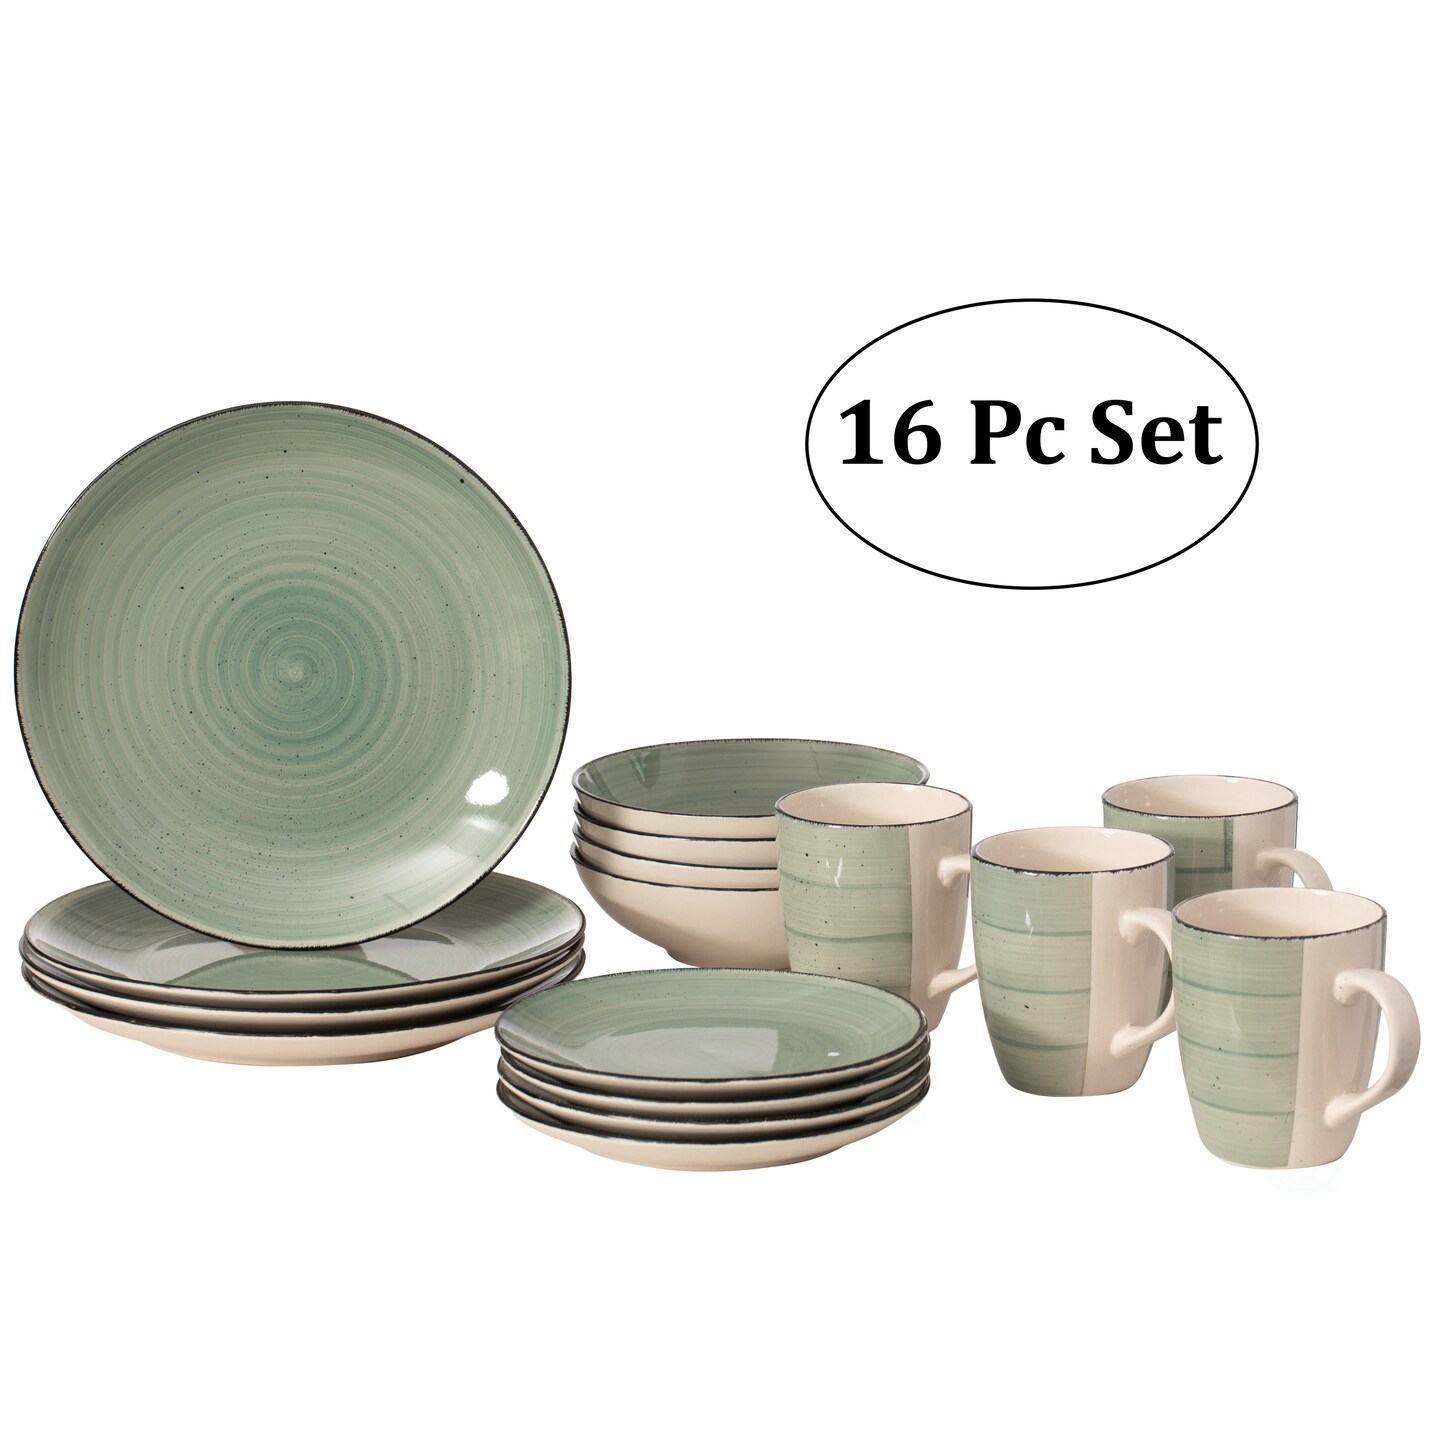 Quickway Imports 16 PC Spin Wash Dinnerware Dish Set for 4 Person Mugs Salad and Dinner Plates and Bowls Sets Dishwasher and Microwave